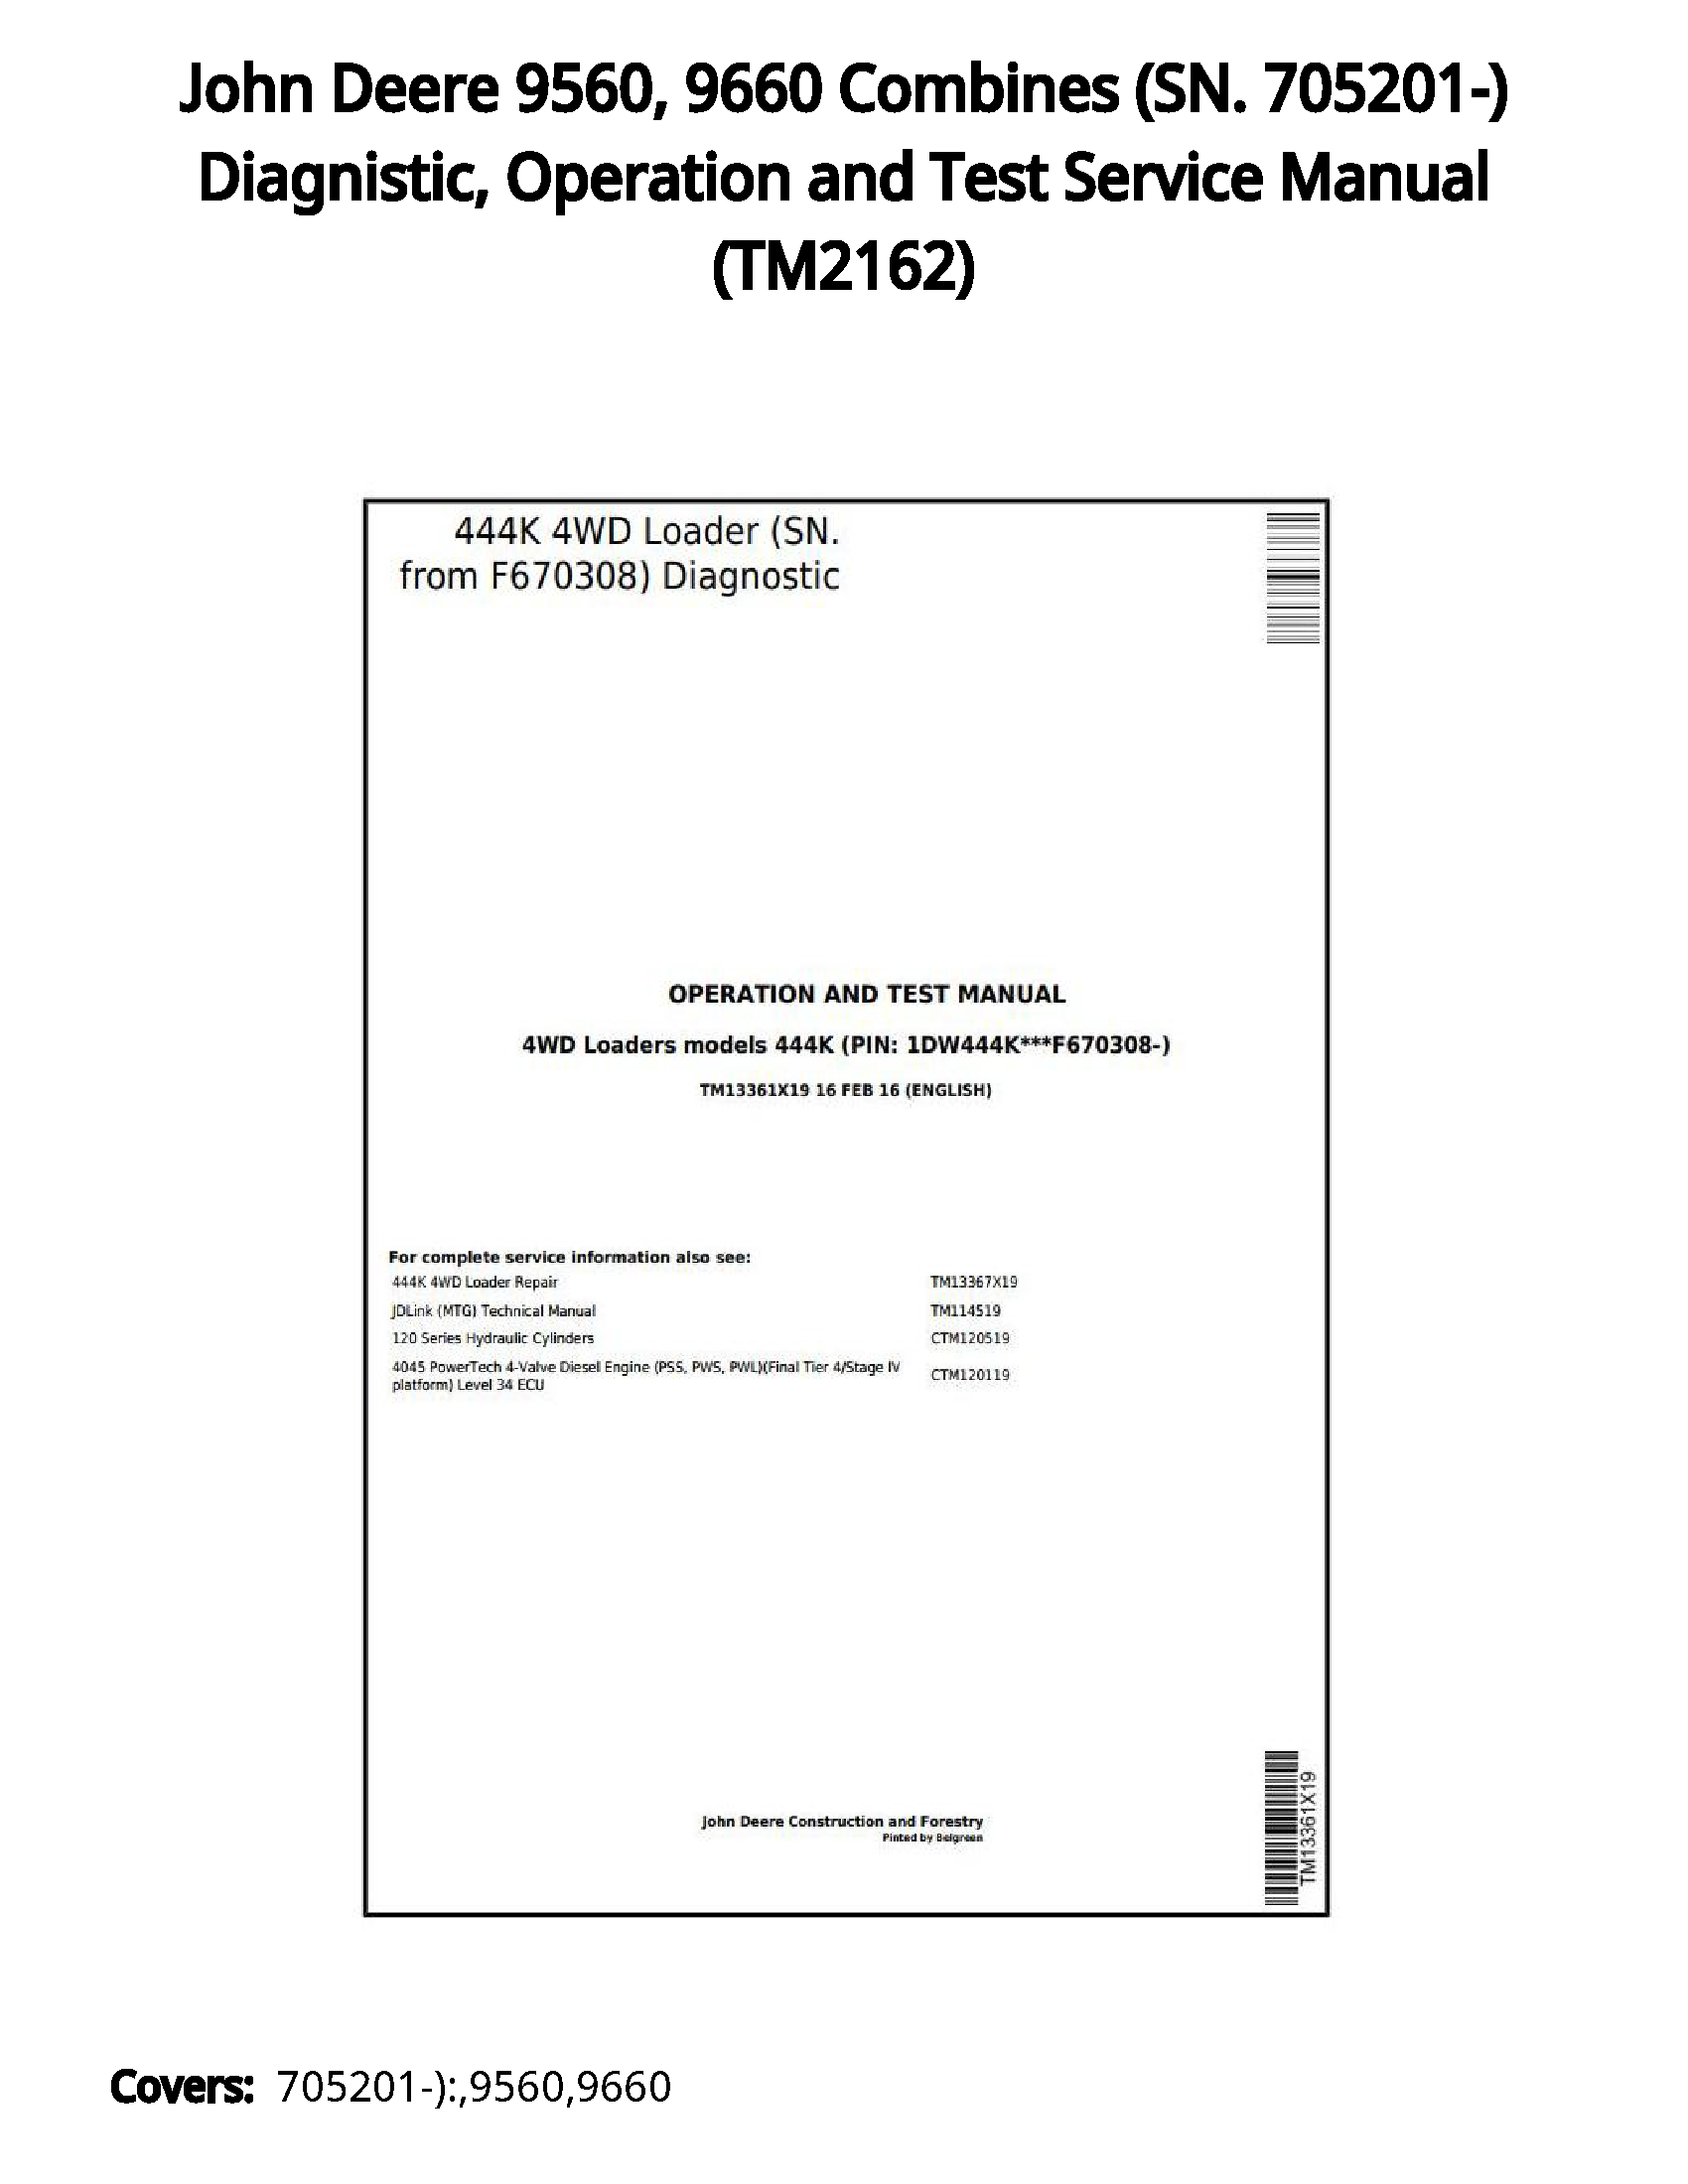 John Deere 9560  9660 Combines (SN. 705201-) Diagnistic  Operation and Test Service Manual - TM2162